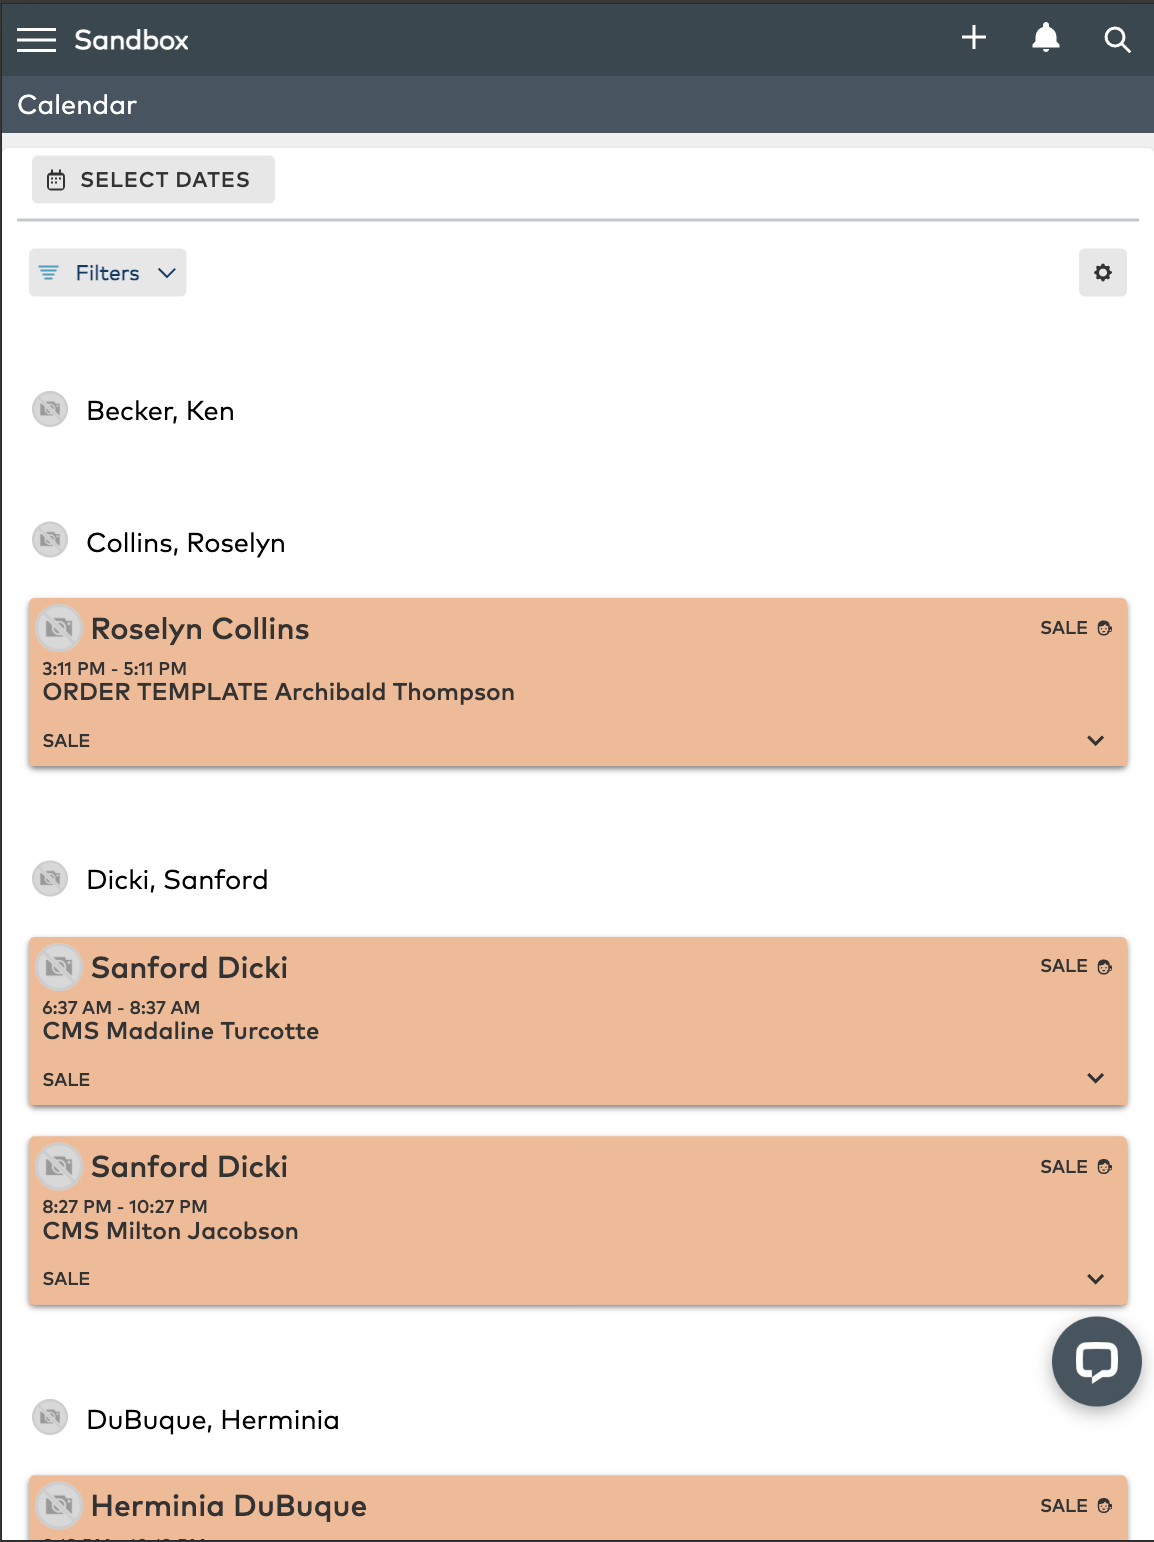 Calendar - Mobile - Group Appointments by User.png